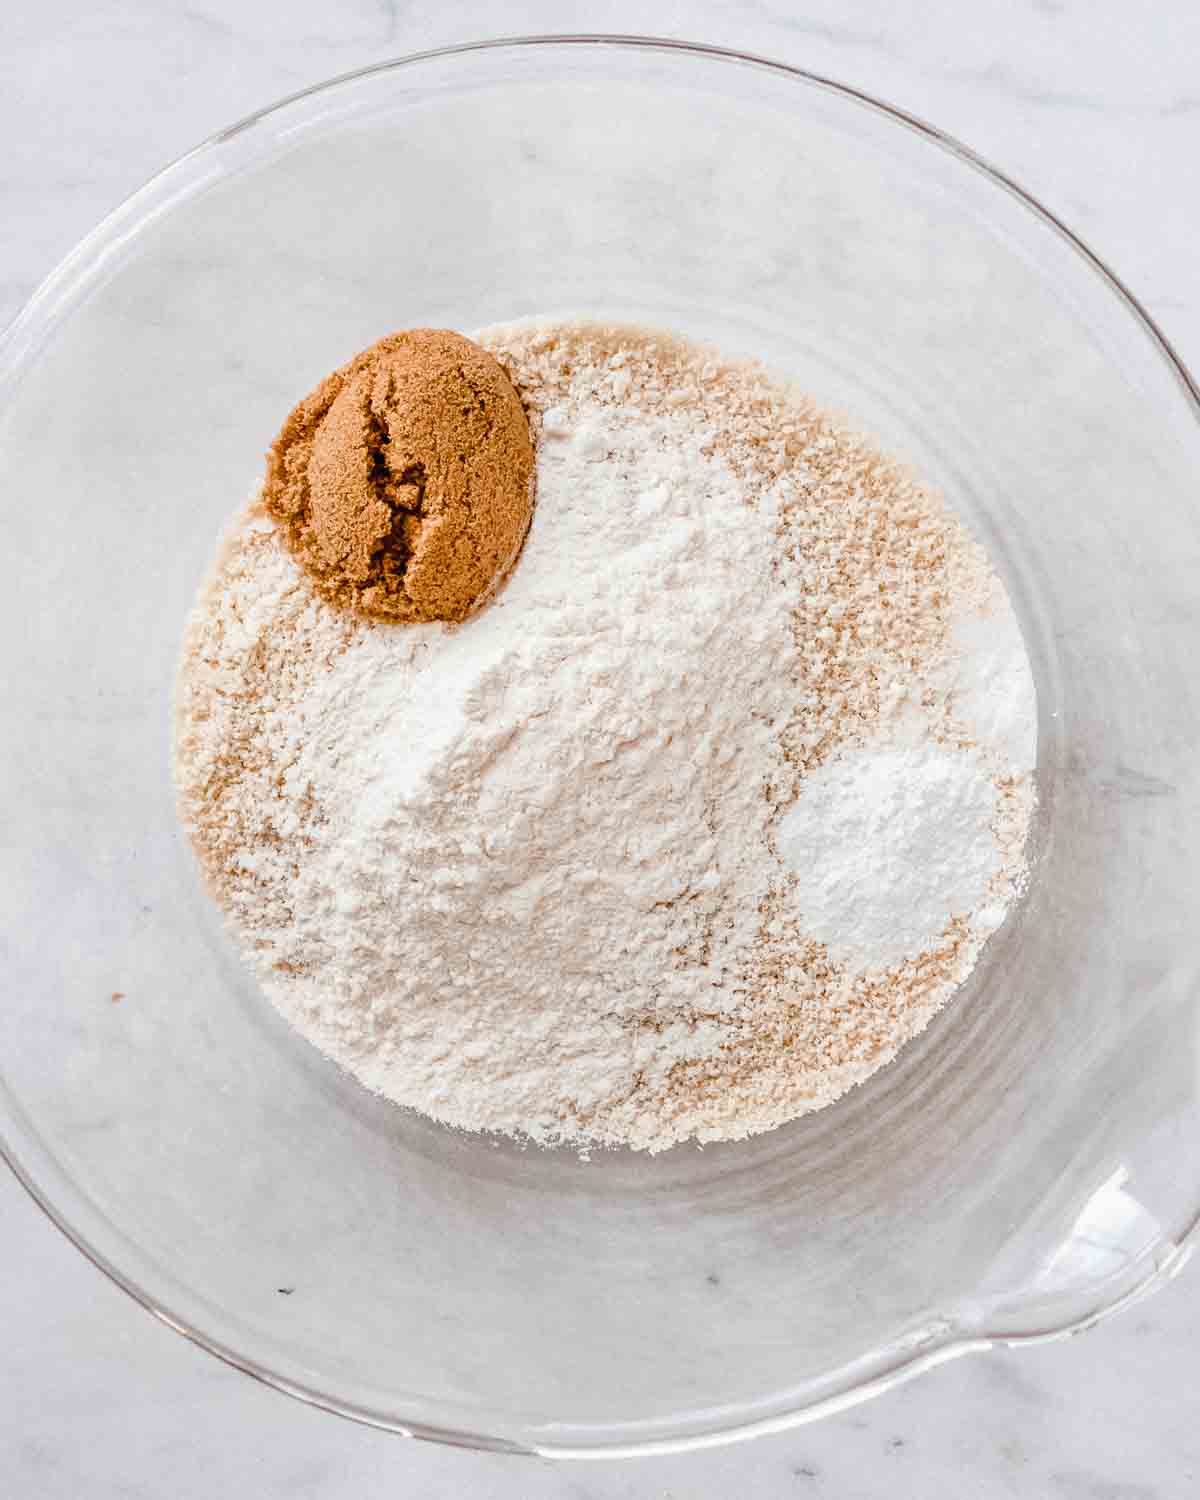 almond flour, baking powder and soda, brown sugar and flour in a mixing bowl.